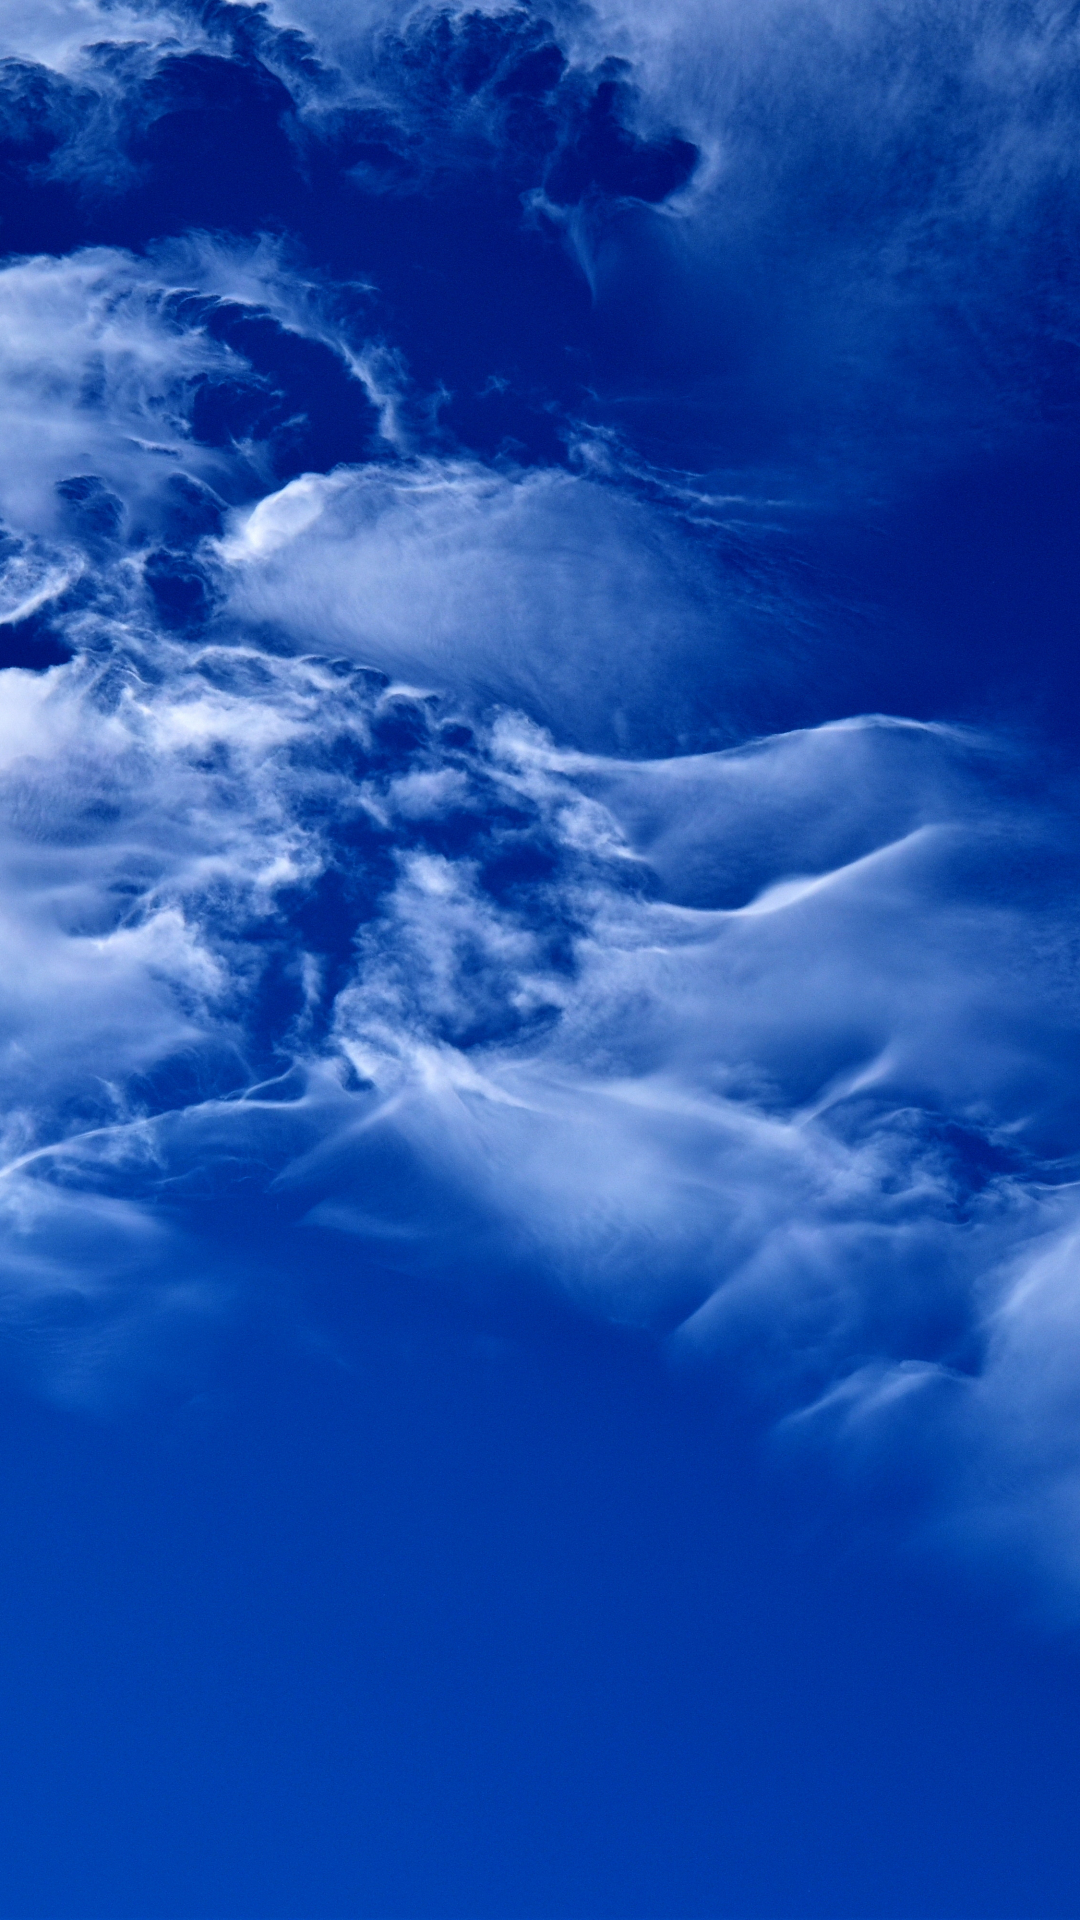 Clouds On A Bright Blue Sky iPhone Wallpaper